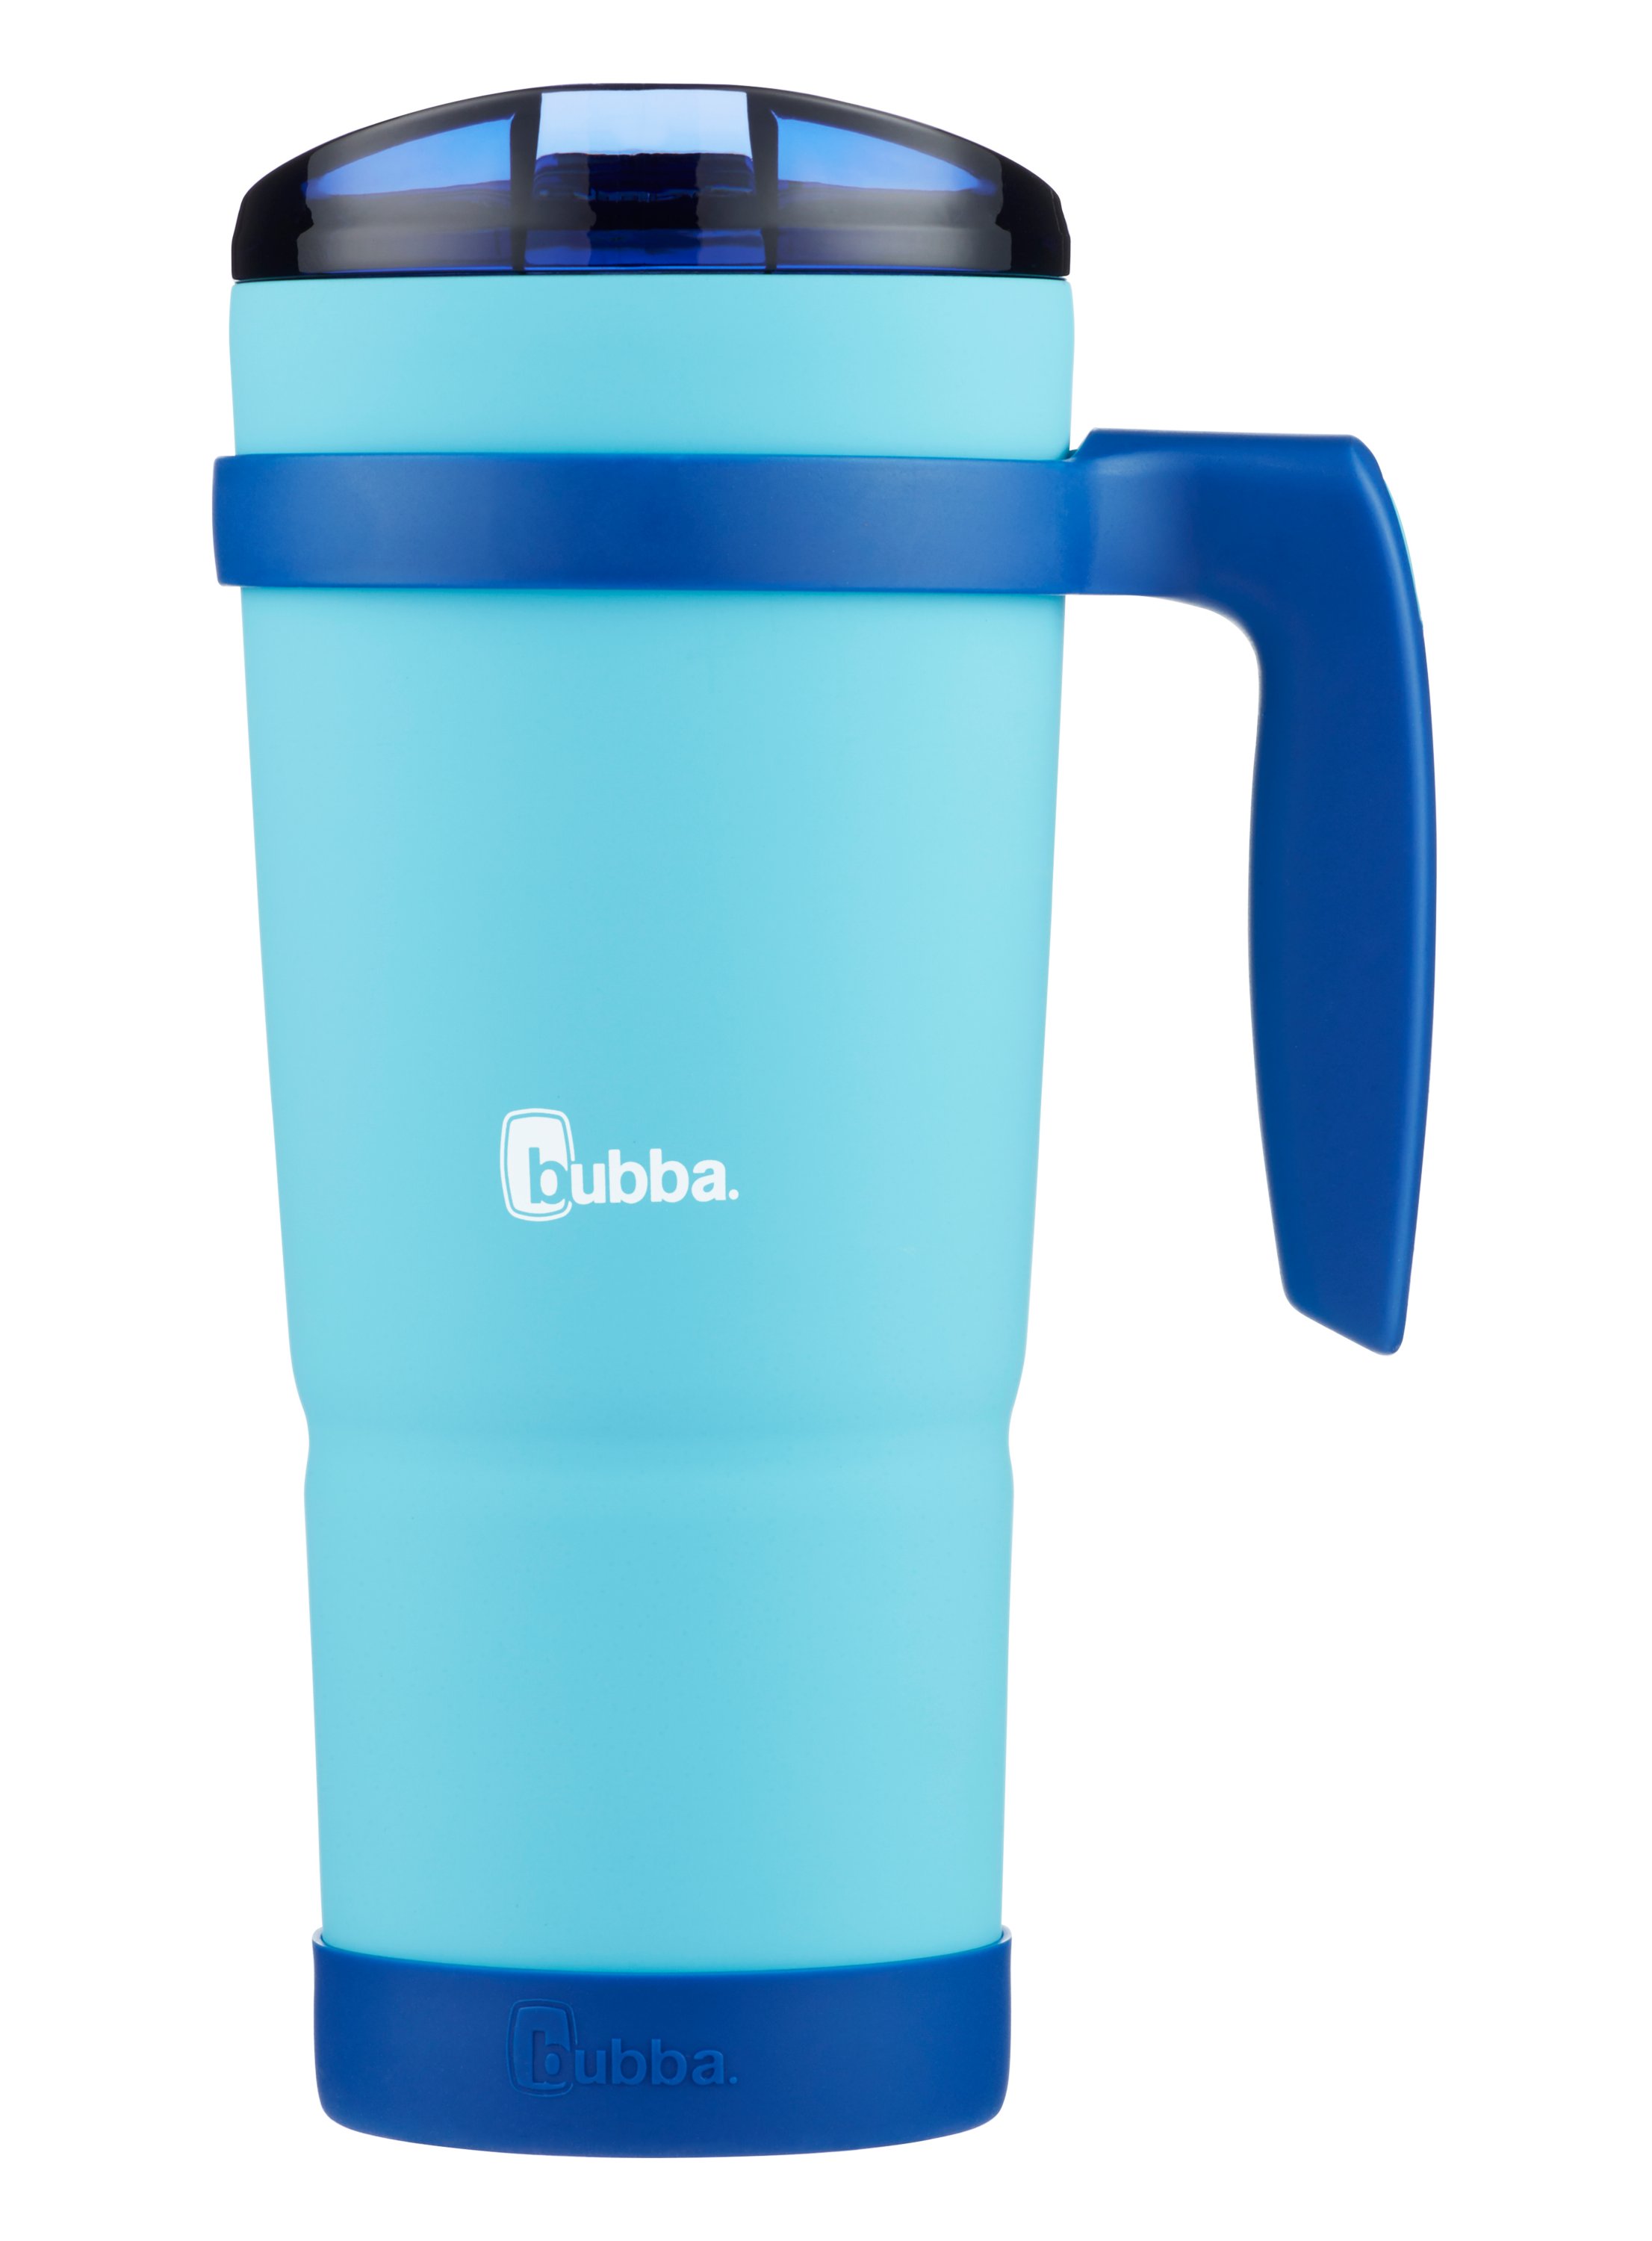 Bubba Envy S Stainless Steel Rubberized Bumper Tumbler with Handle - Pool Blue - 32 oz